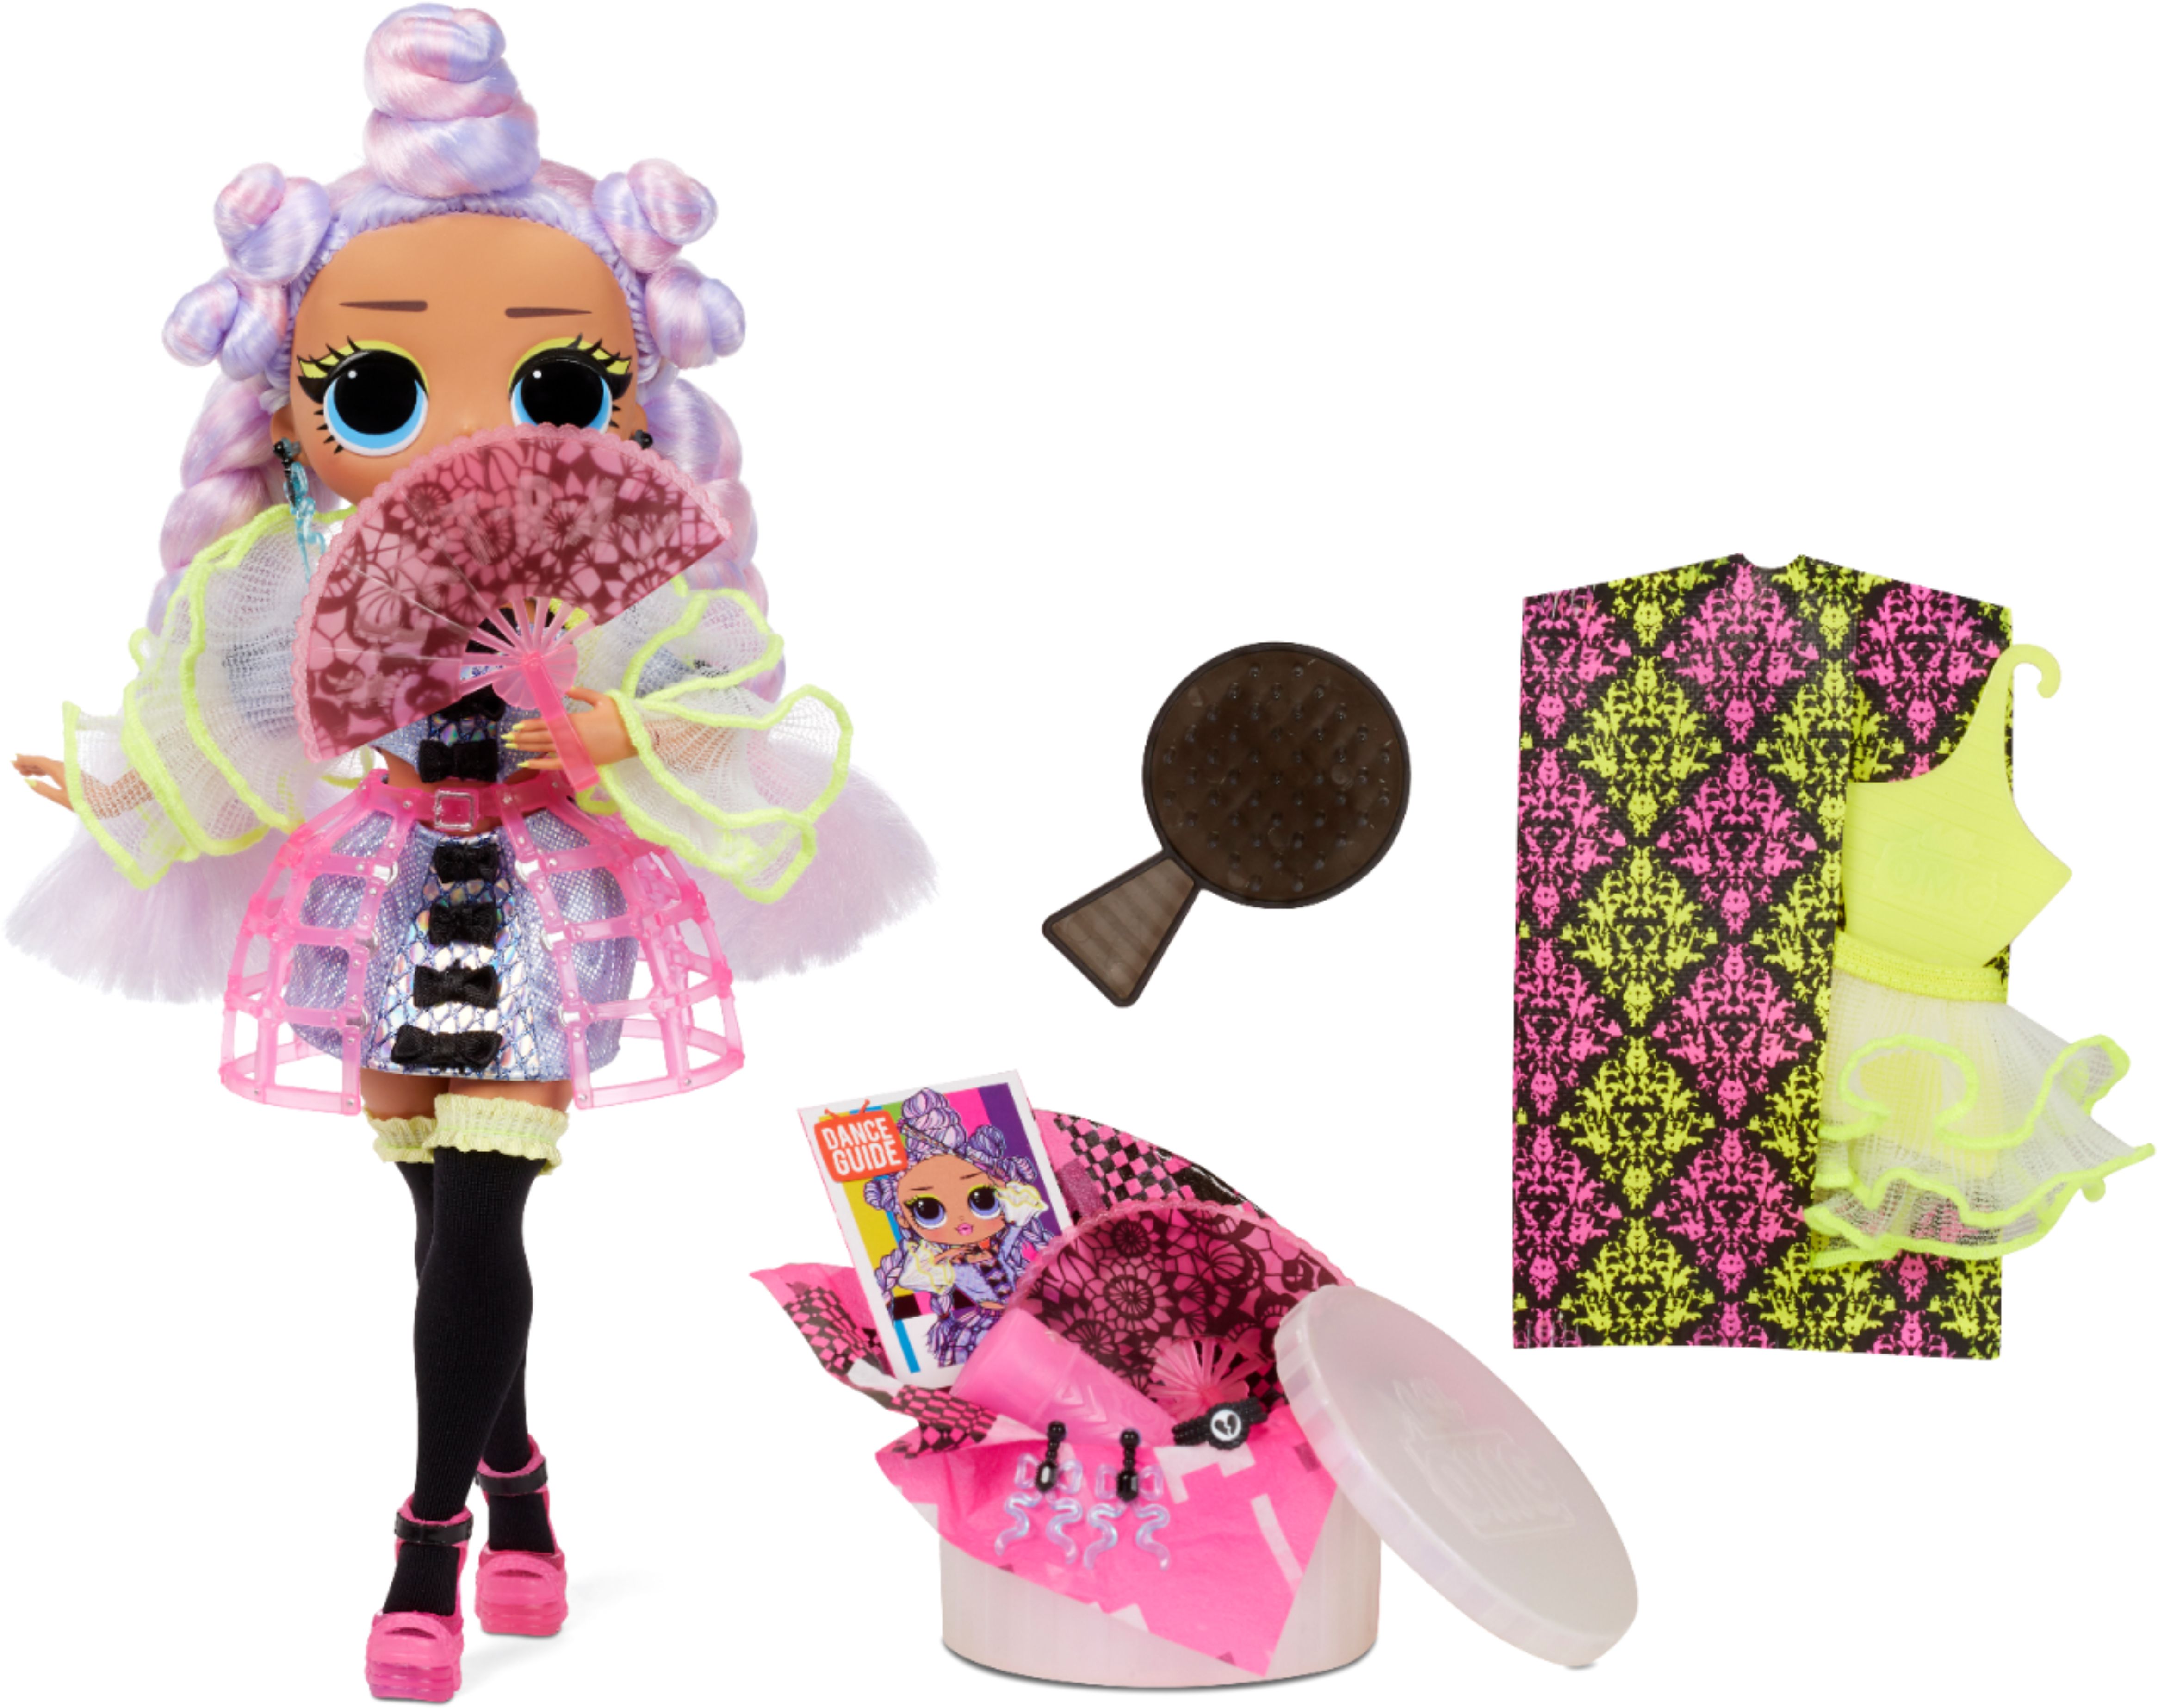 Angle View: LOL Surprise OMG Dance Dance Dance Miss Royale Fashion Doll With 15 Surprises Including Magic Blacklight, Shoes, Hair Brush, Doll Stand and TV Package - For Girls Ages 4+